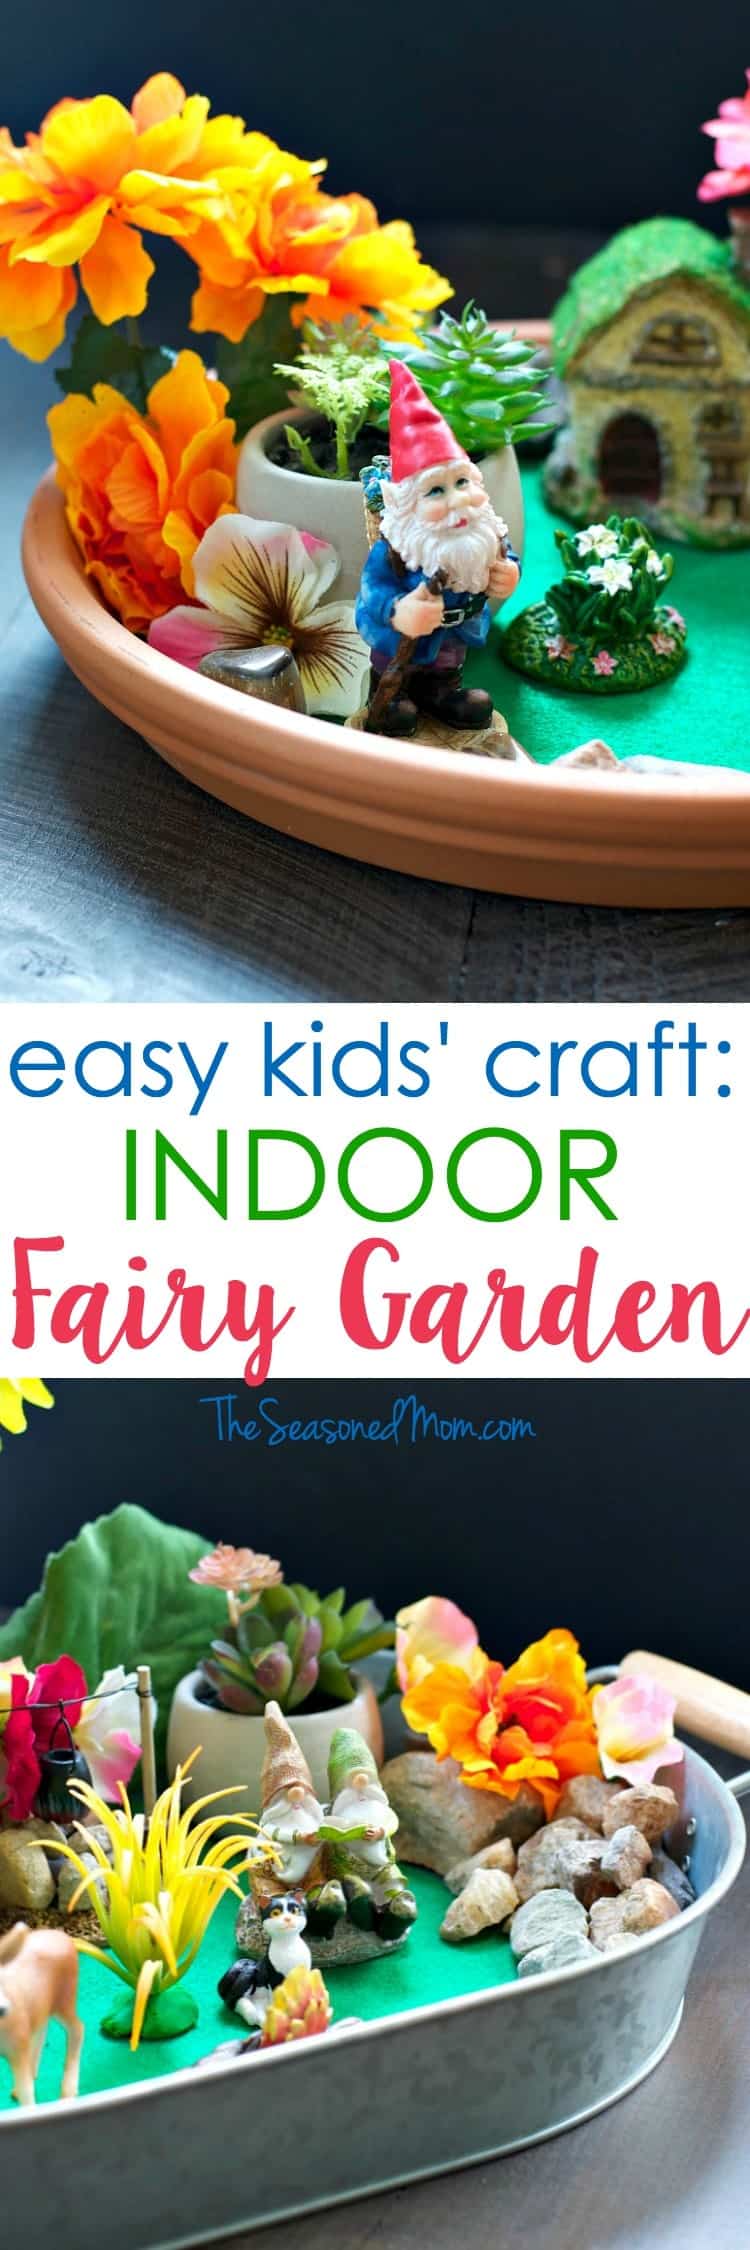 With a few simple supplies, you and your young children can create an enchanting Indoor Fairy Garden! This easy craft for kids is the perfect rainy day activity for preschoolers or for older children who can design and build from their own imagination!